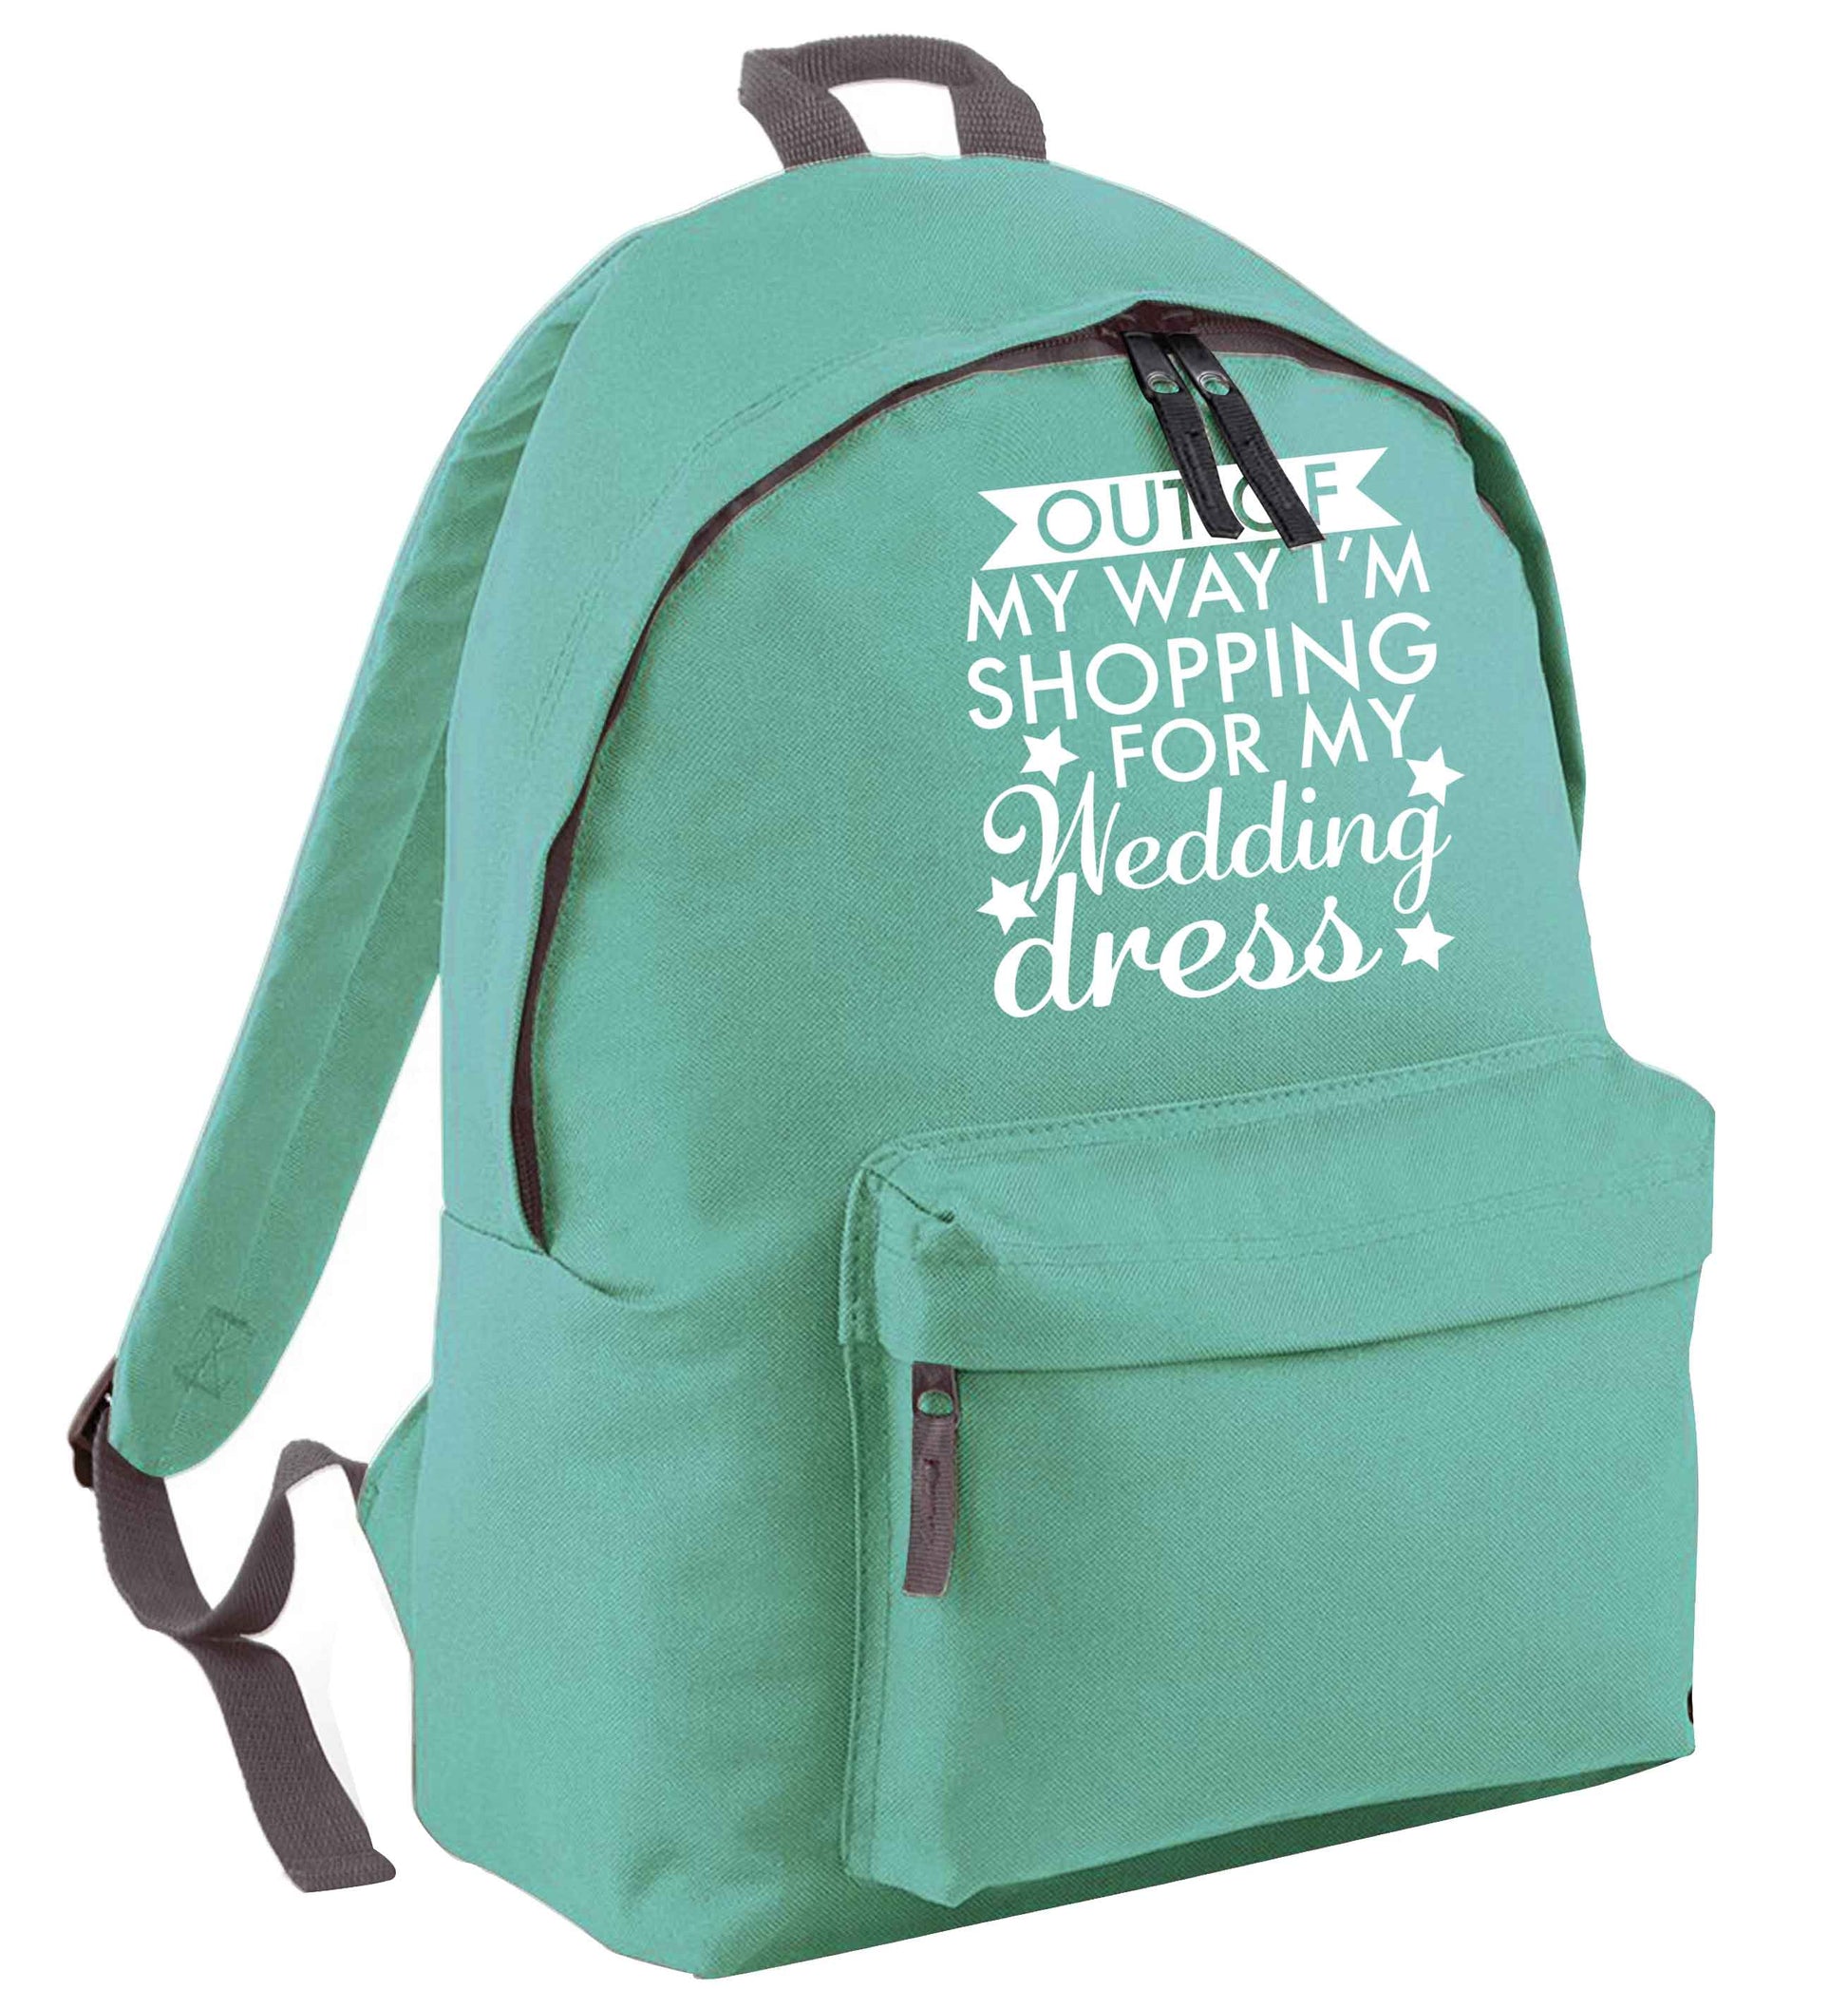 Out of my way I'm shopping for my wedding dress mint adults backpack